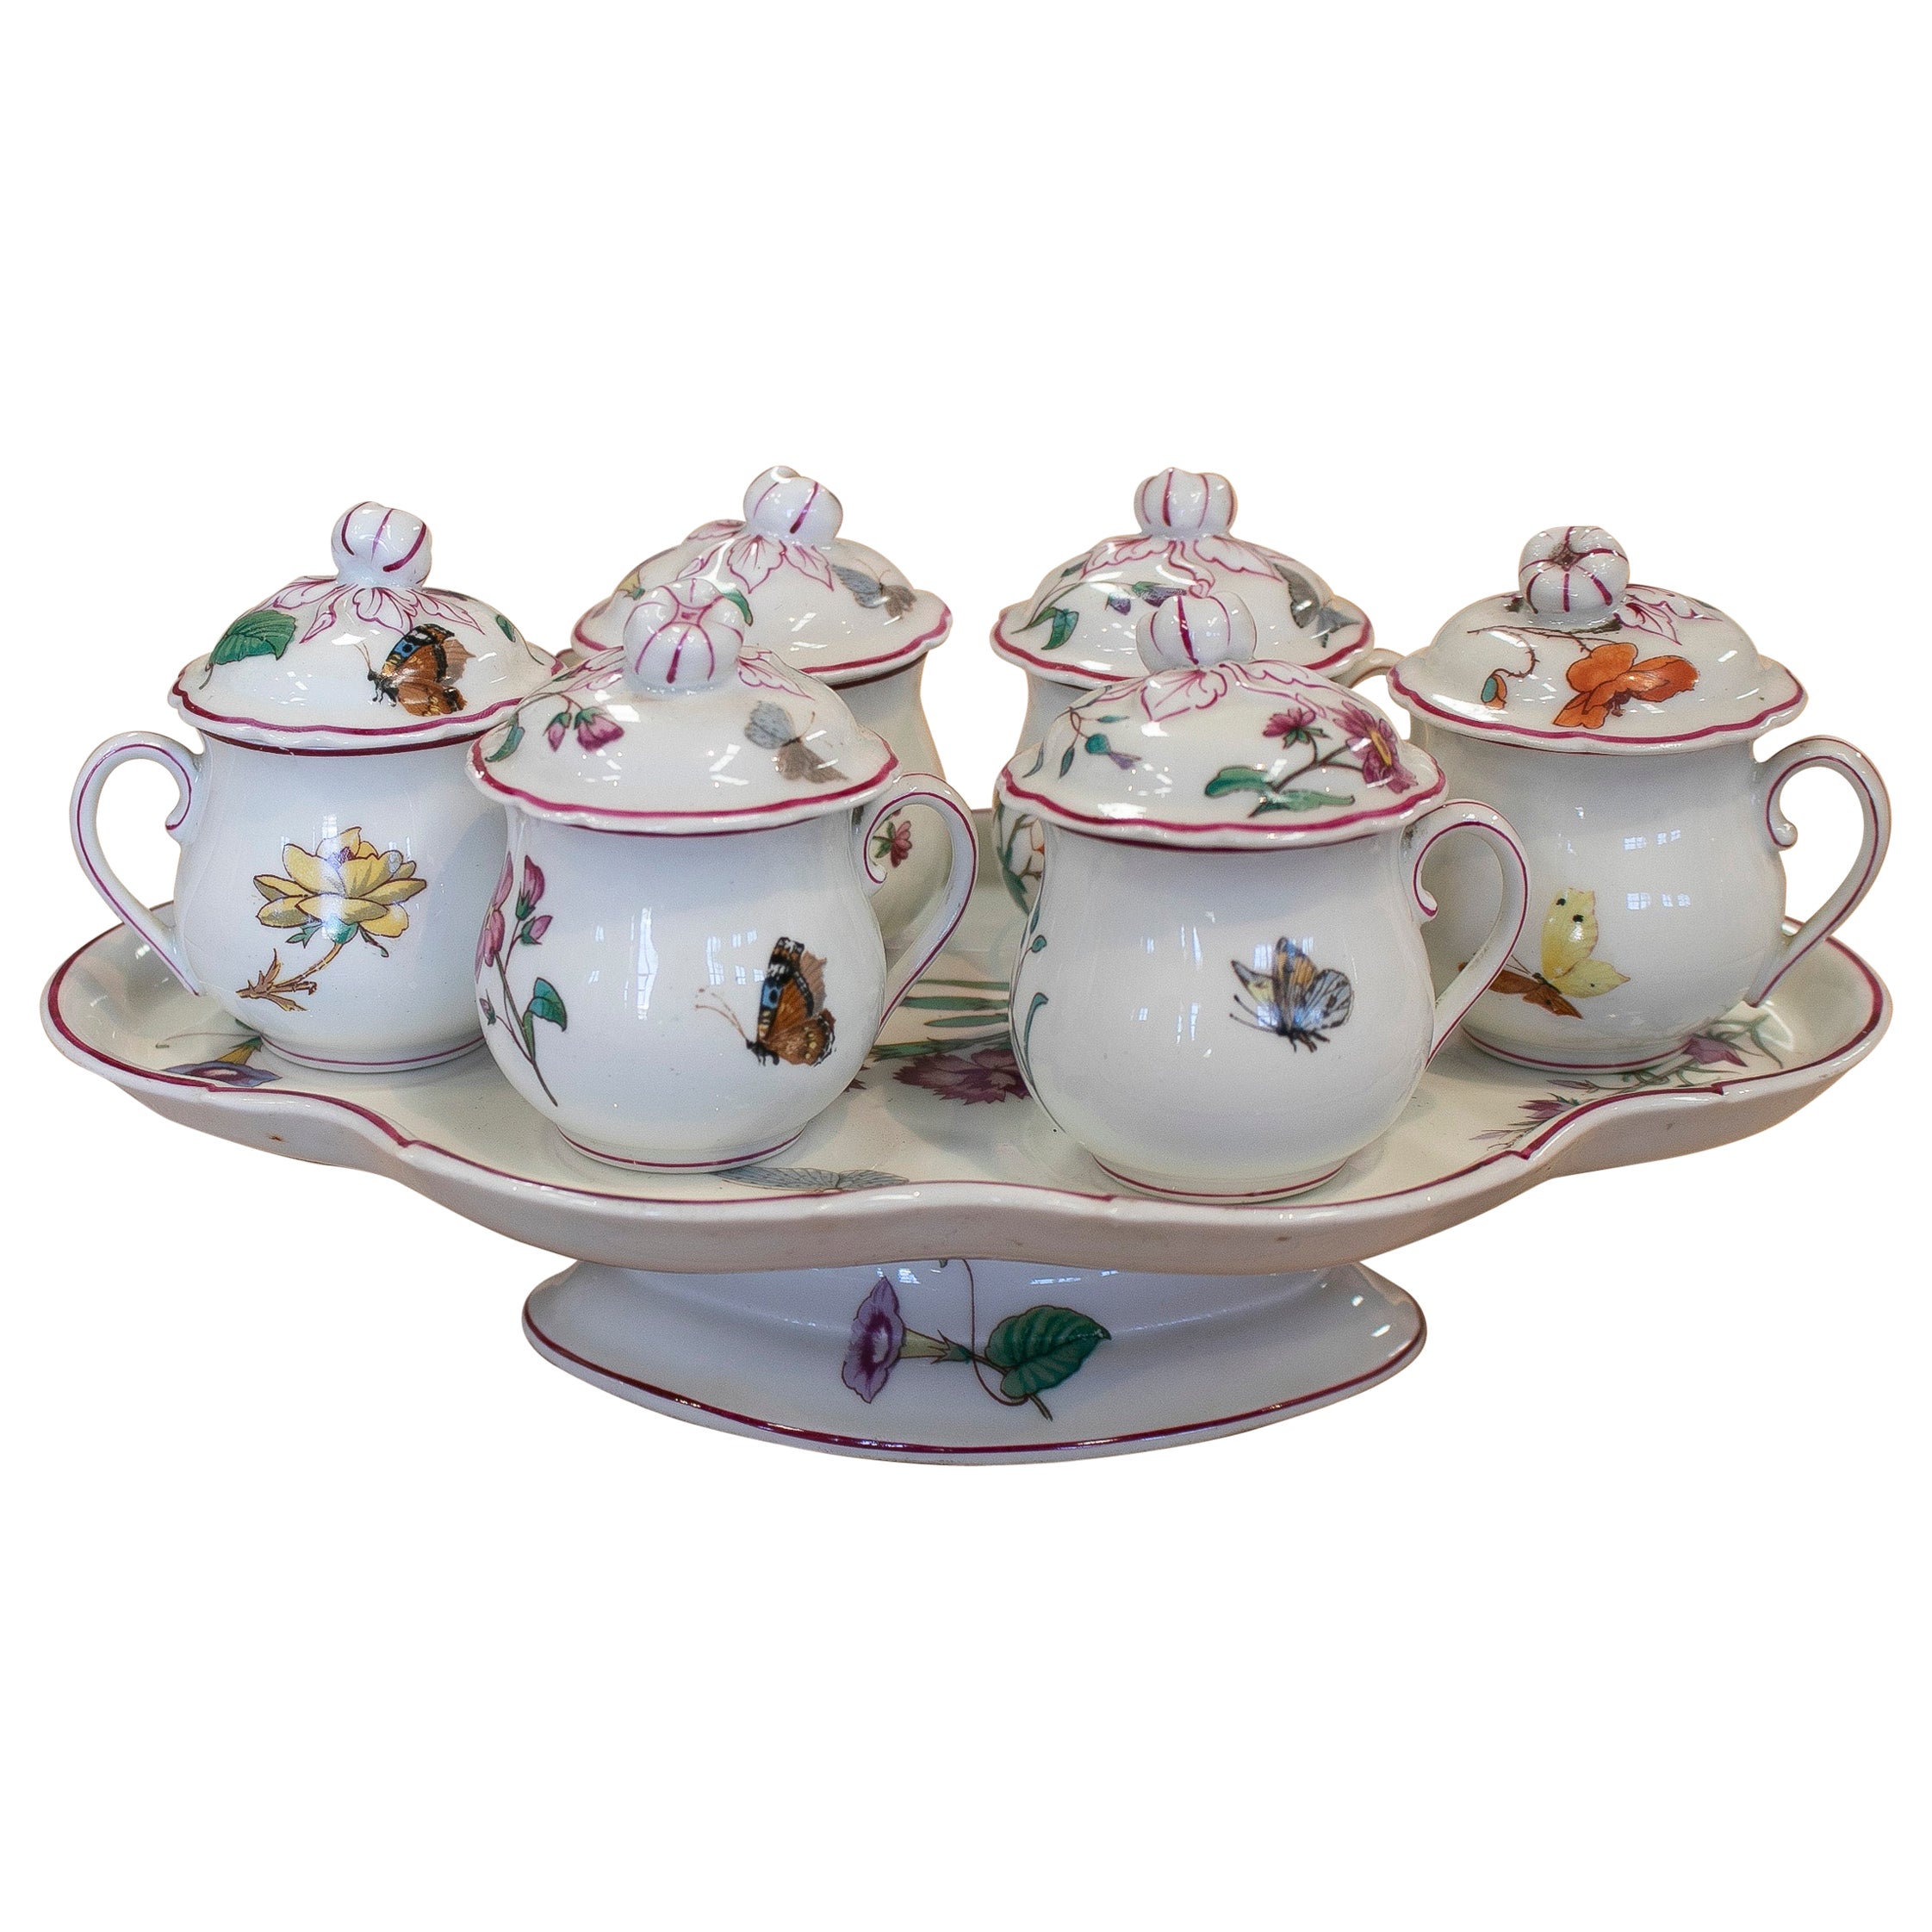 1930s French Porcelain Tasse Trembleuse Chocolate Set w/ 6 Drinking Cups & Tray